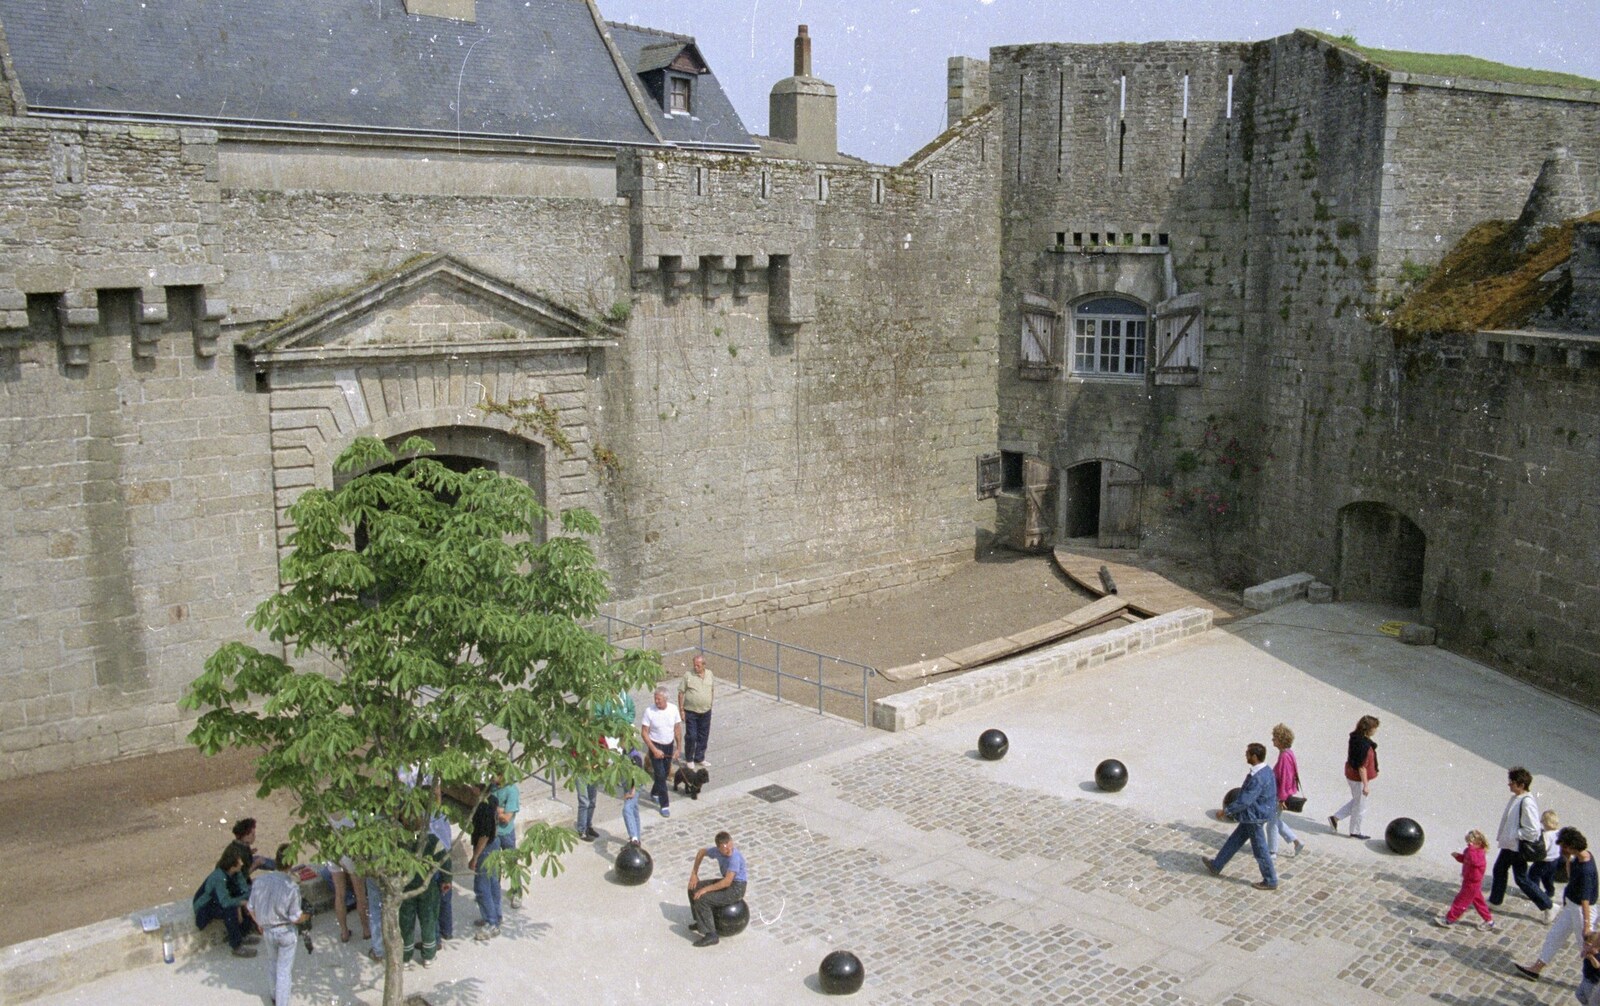 People mill around a square from A Trip To Huelgoat, Brittany, France - 11th June 1990